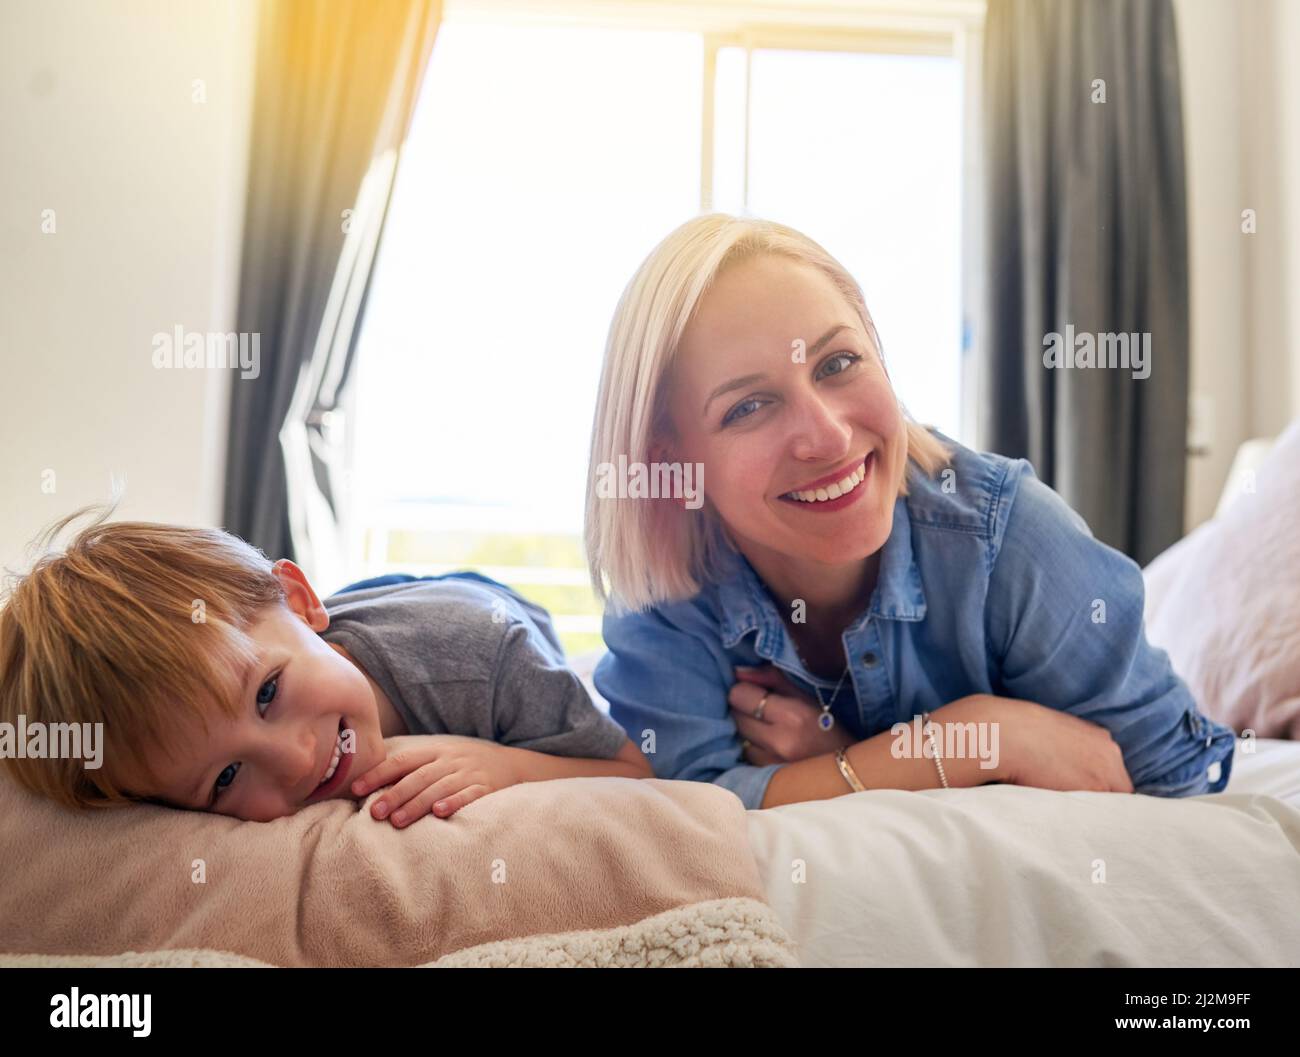 Theyre happiest when theyre together. Portrait of a mother and son spending some quality time together at home. Stock Photo